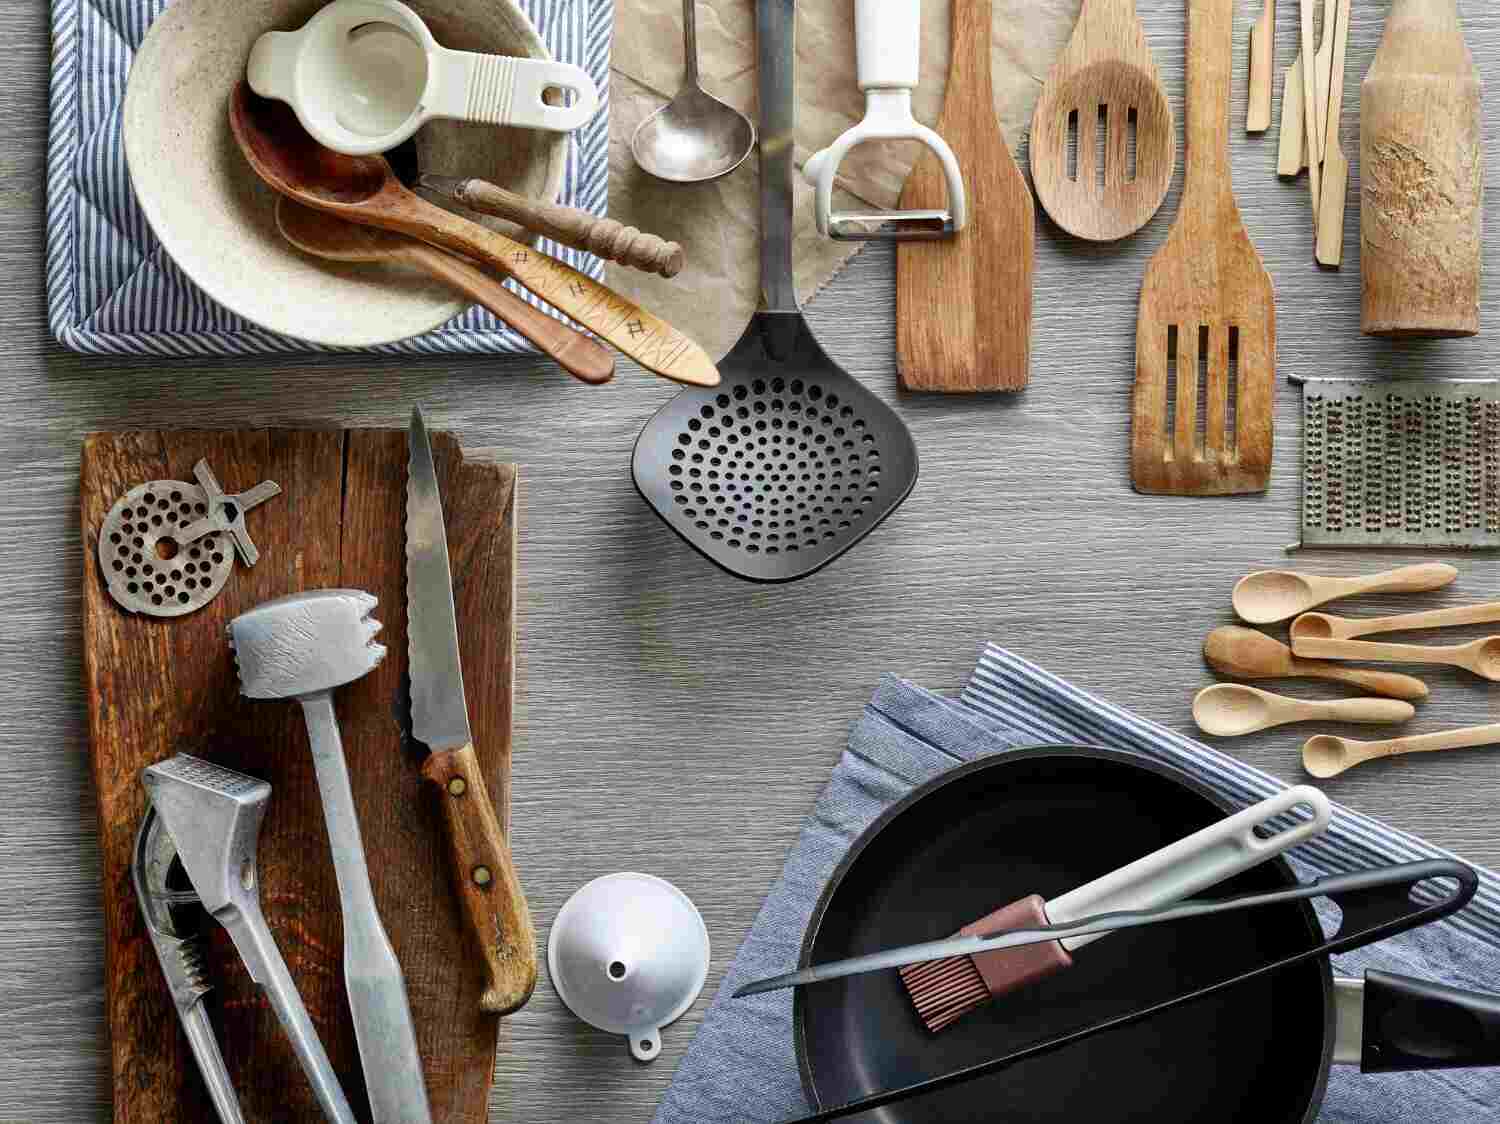 Kitchen cooking utensils for a cloud kitchen